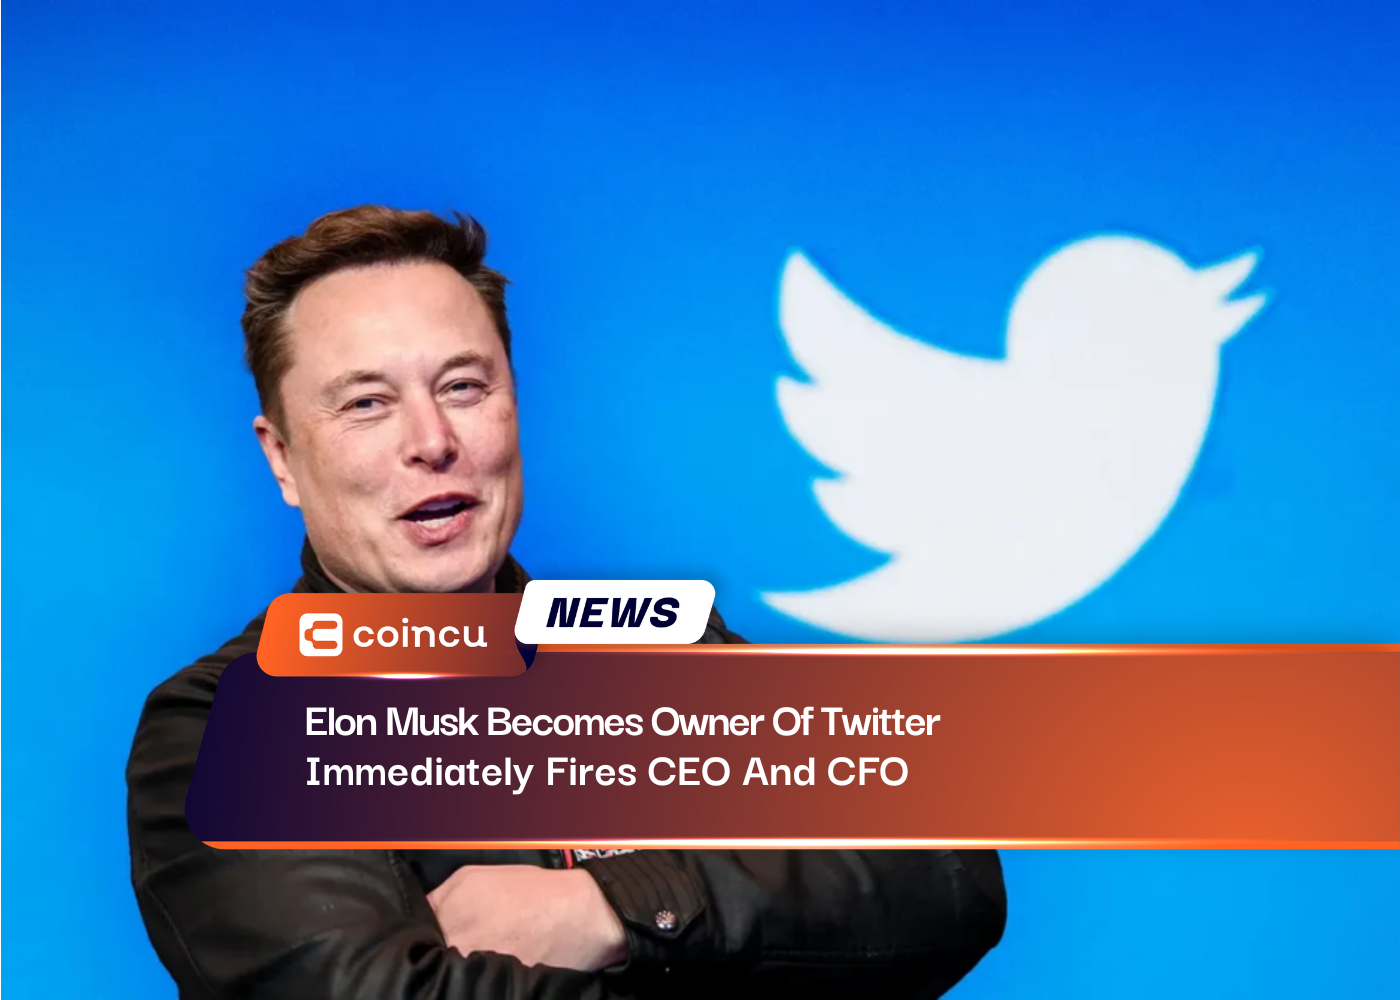 Elon Musk Becomes Owner Of Twitter, Immediately Fires CEO And CFO